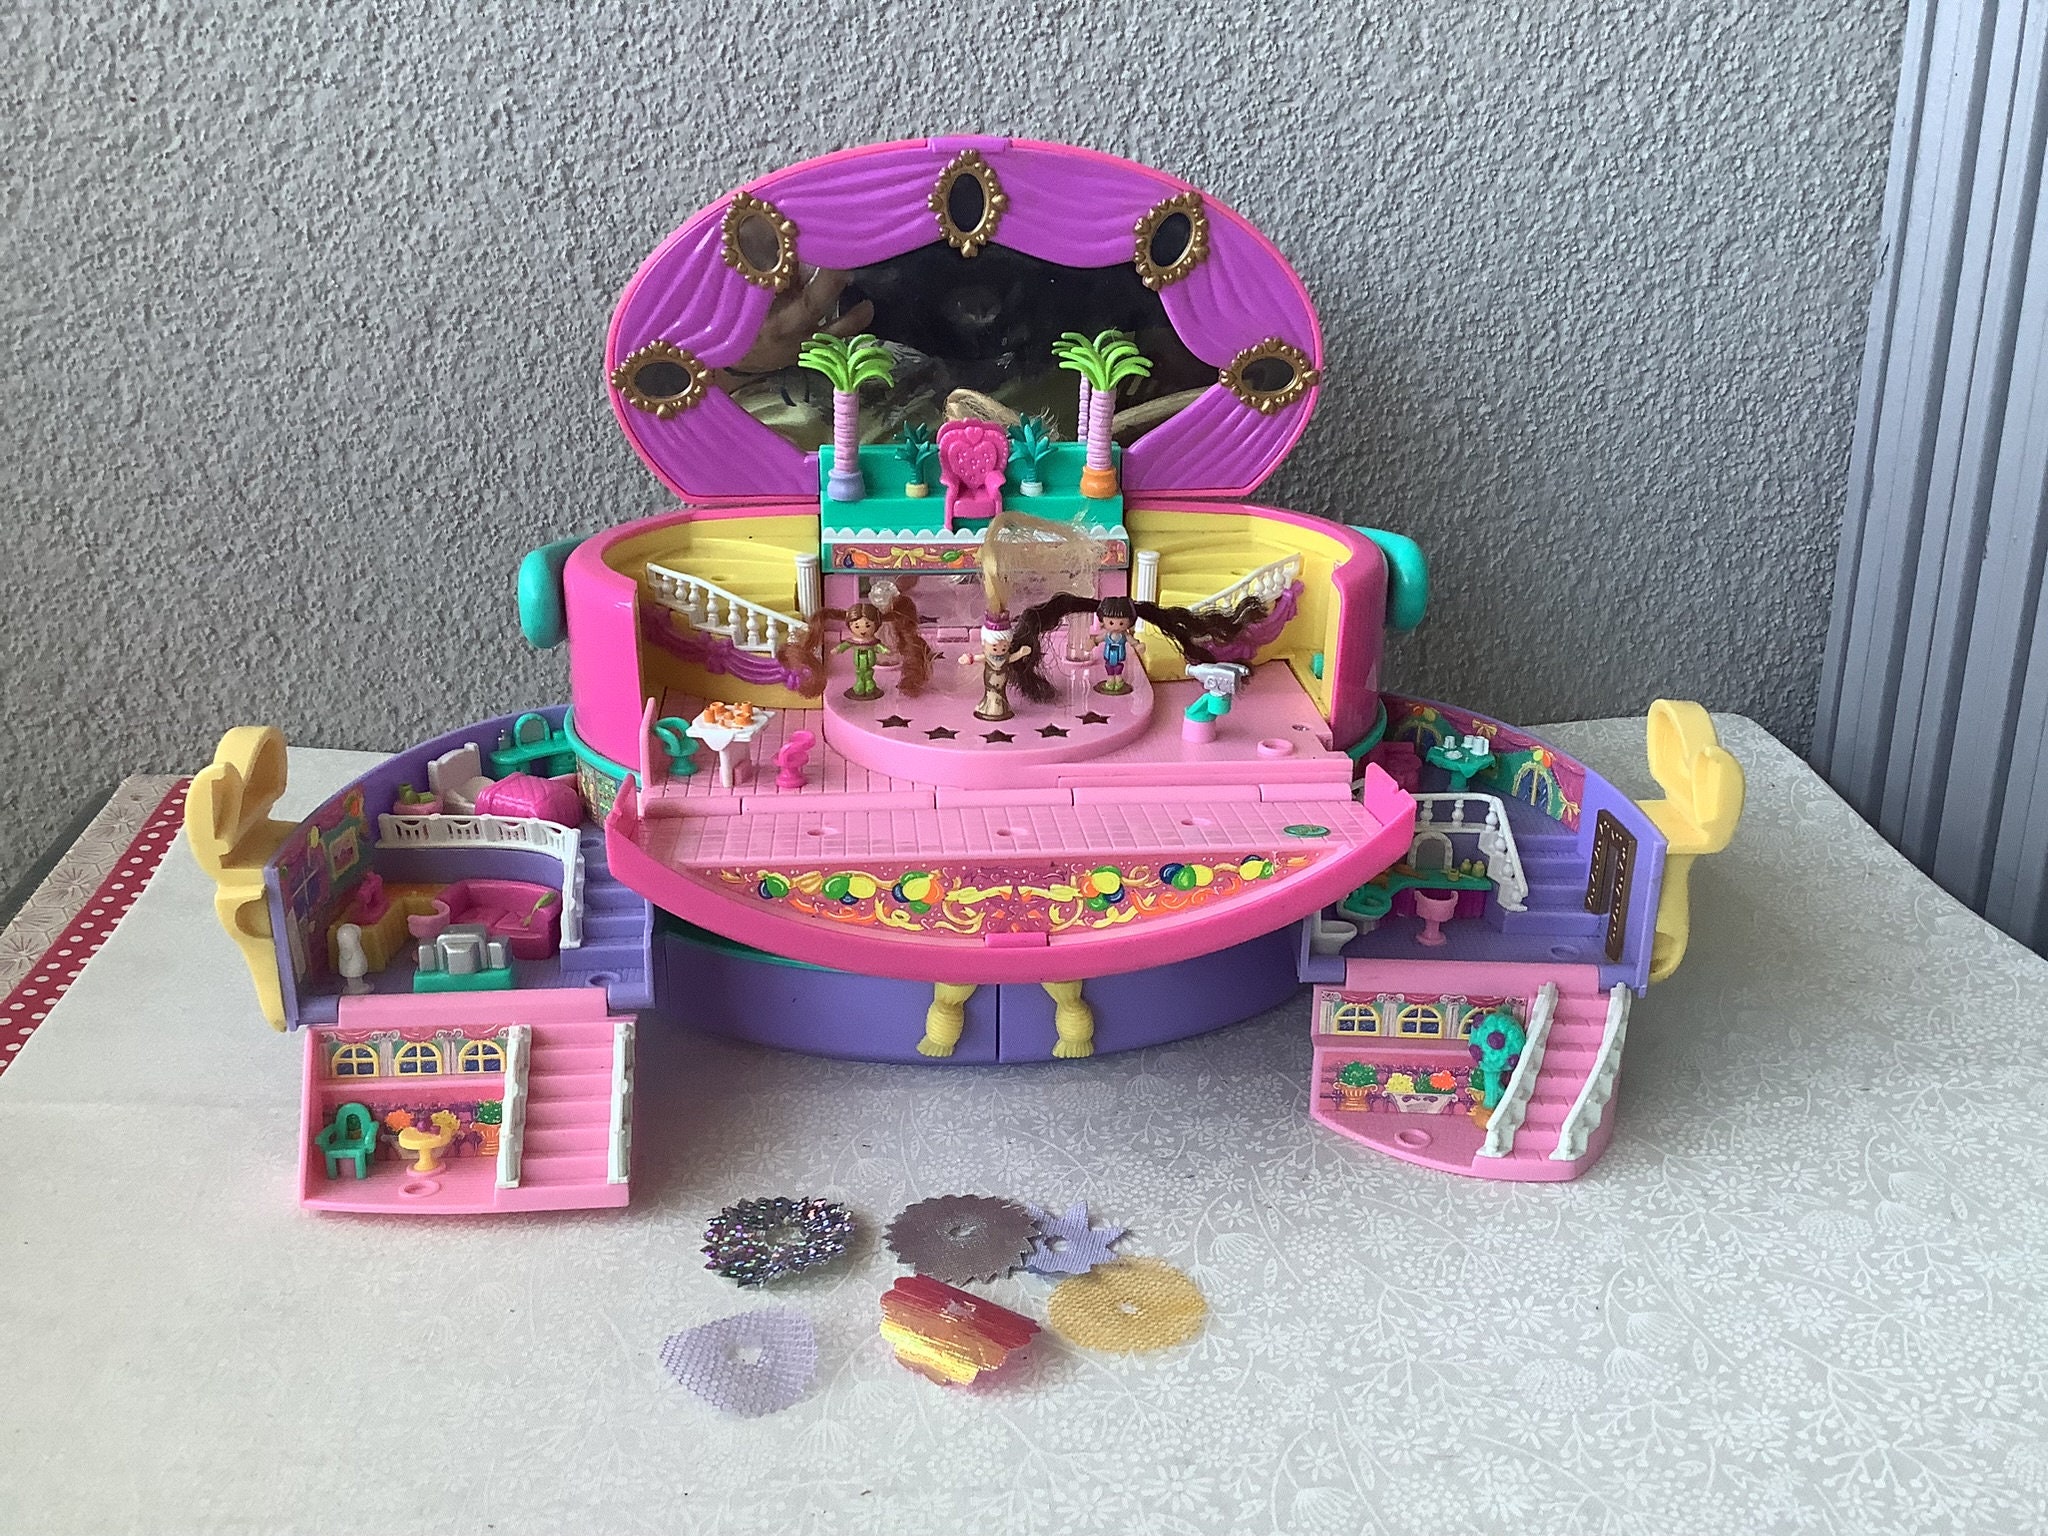 Polly Pocket - 2004 Fashion Beach Game, Brand New -Opened Box